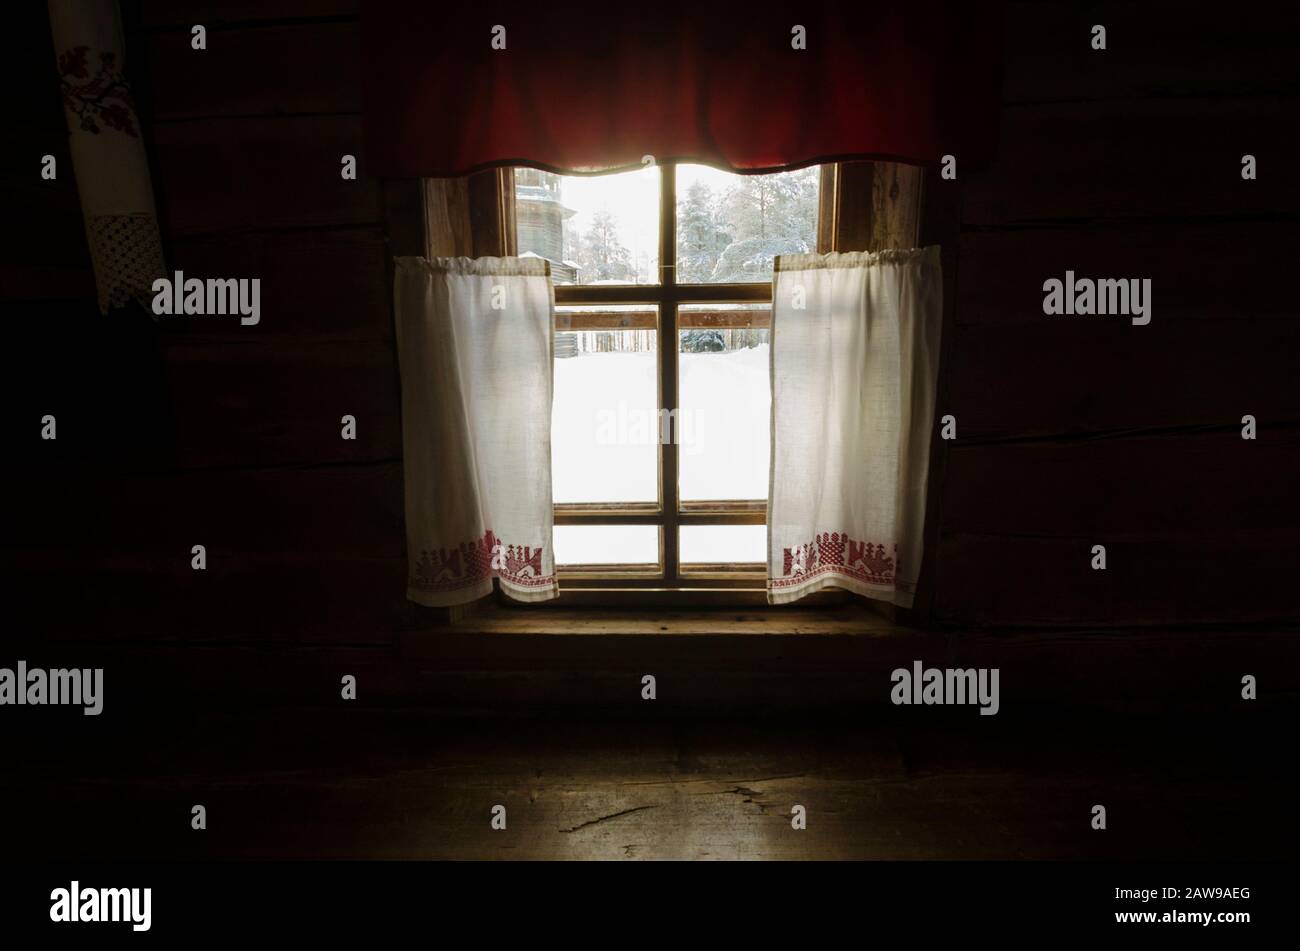 Window in a warm house with curtains. Home comfort Stock Photo